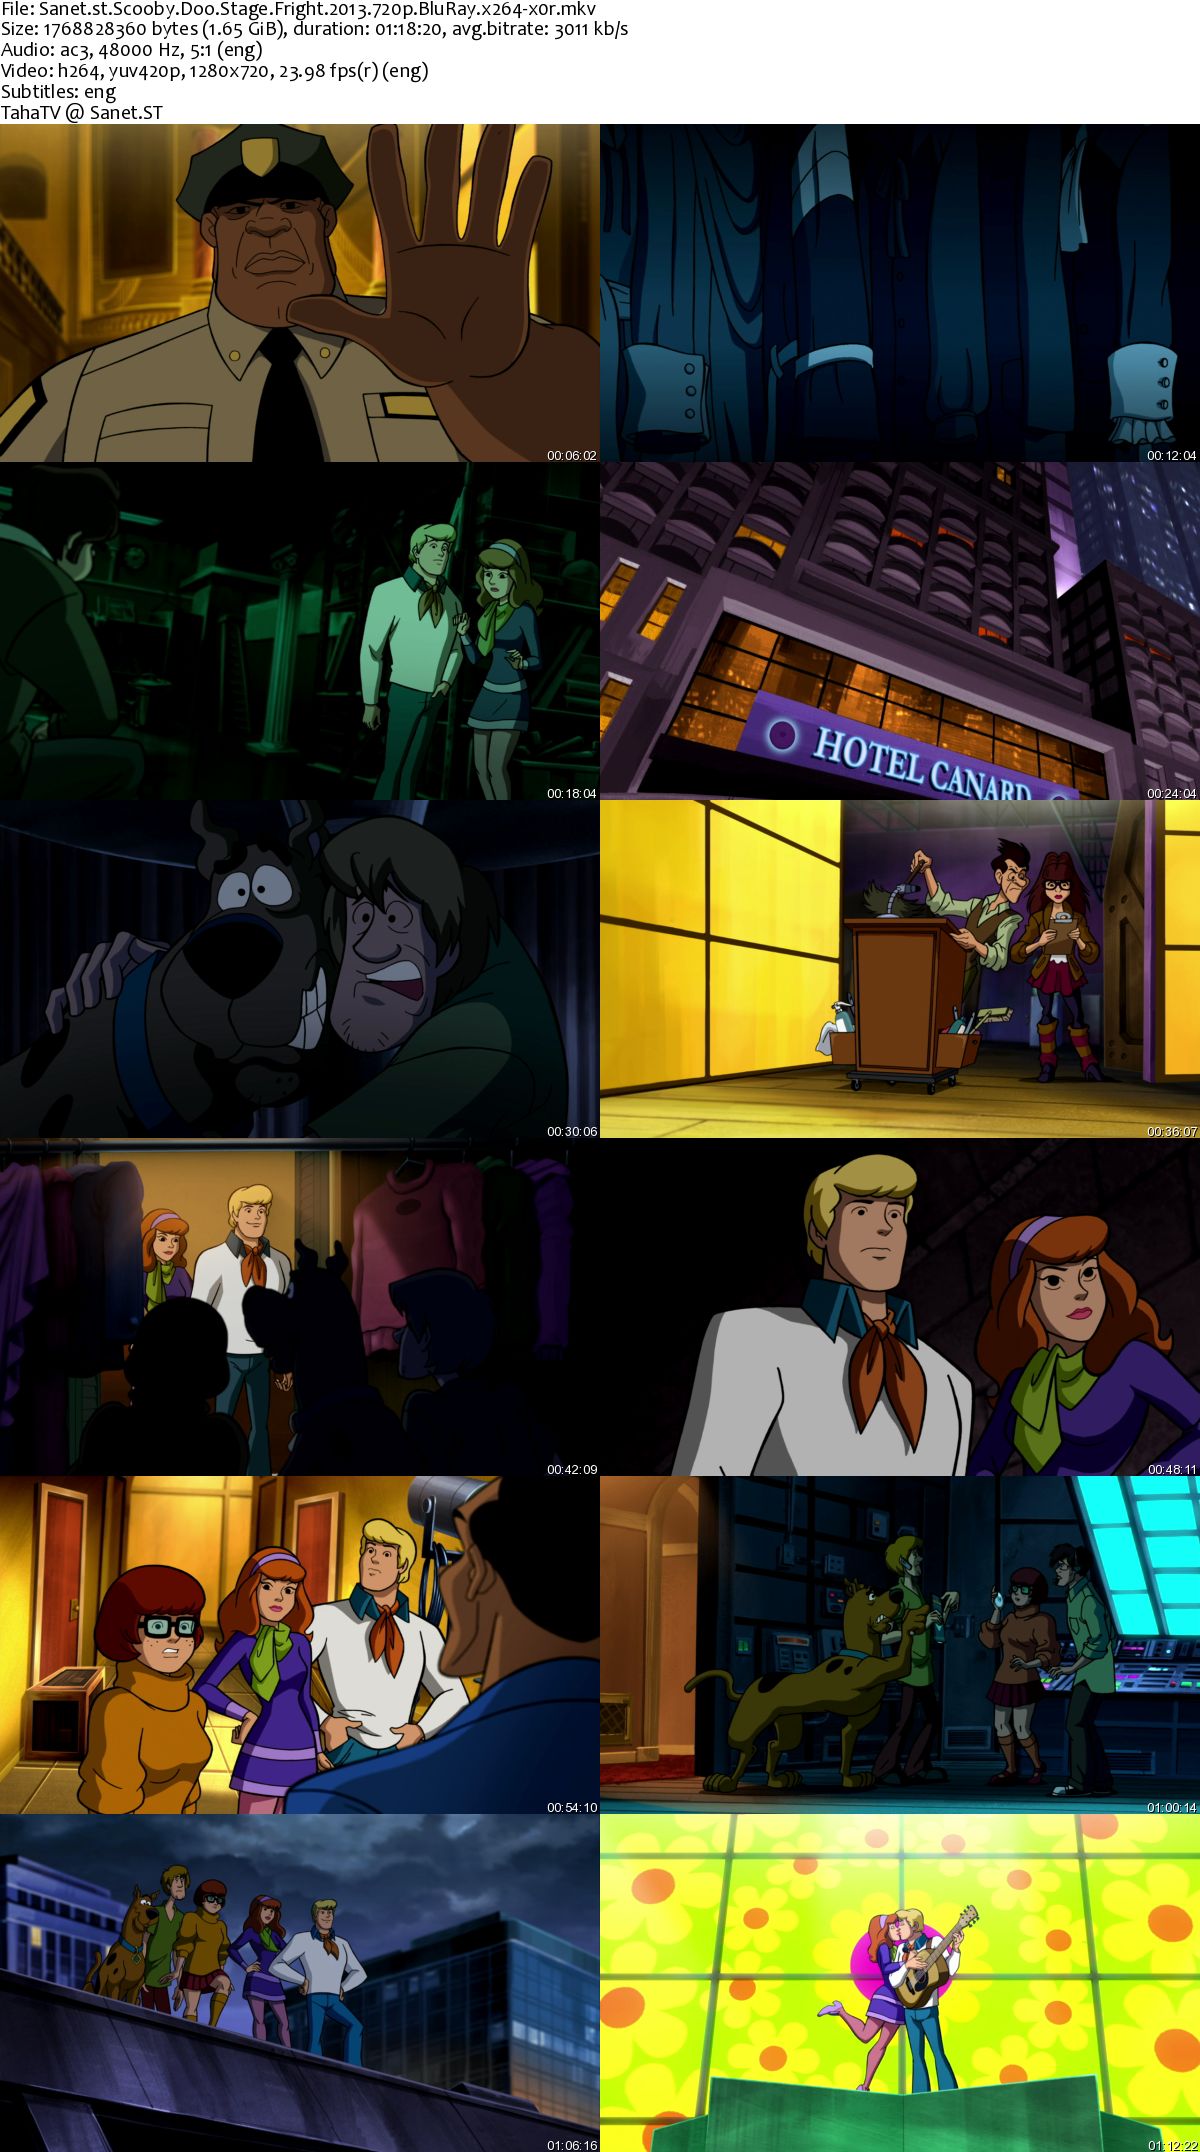 2013 Scooby-Doo! Stage Fright